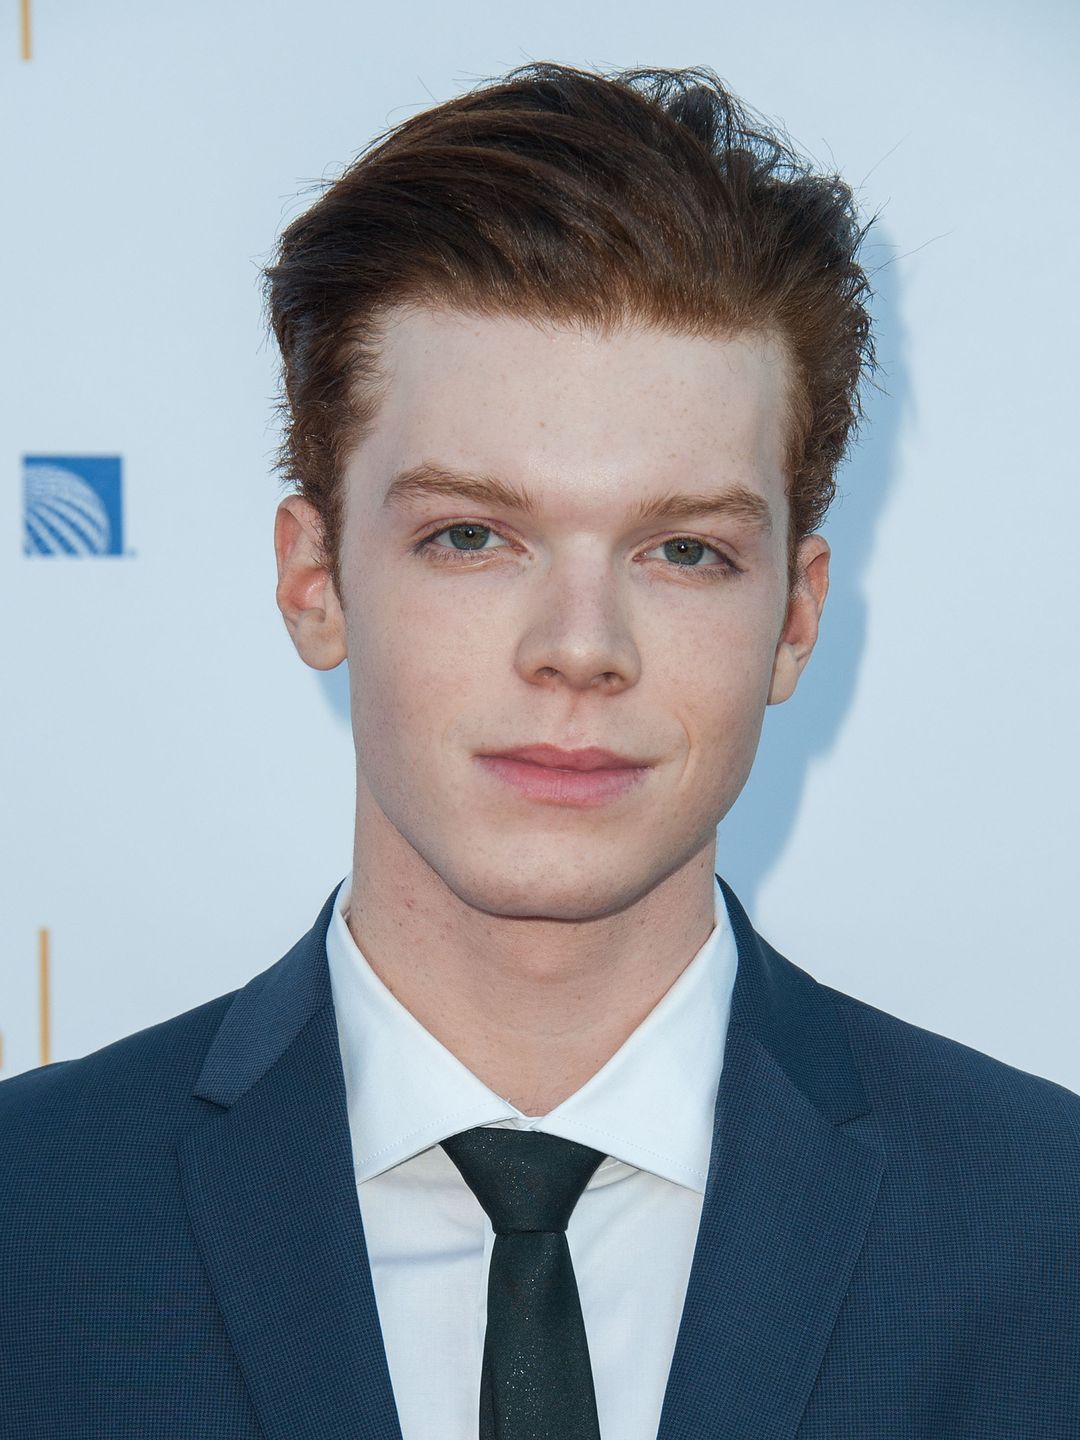 Cameron Monaghan story of success